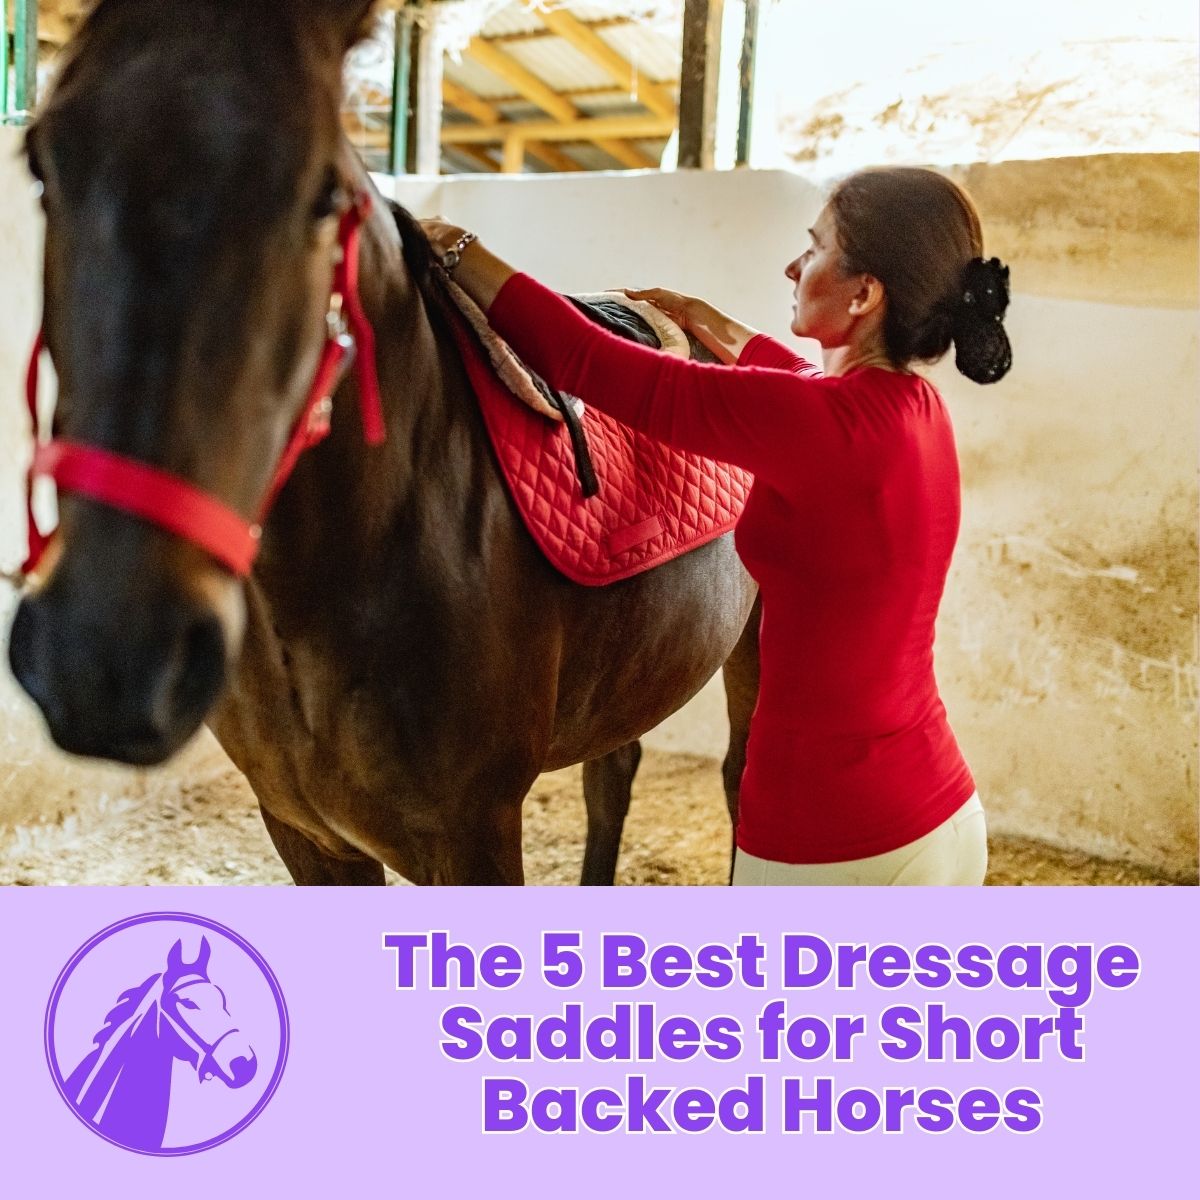 You are currently viewing The 5 Best Dressage Saddles for Short Backed Horses